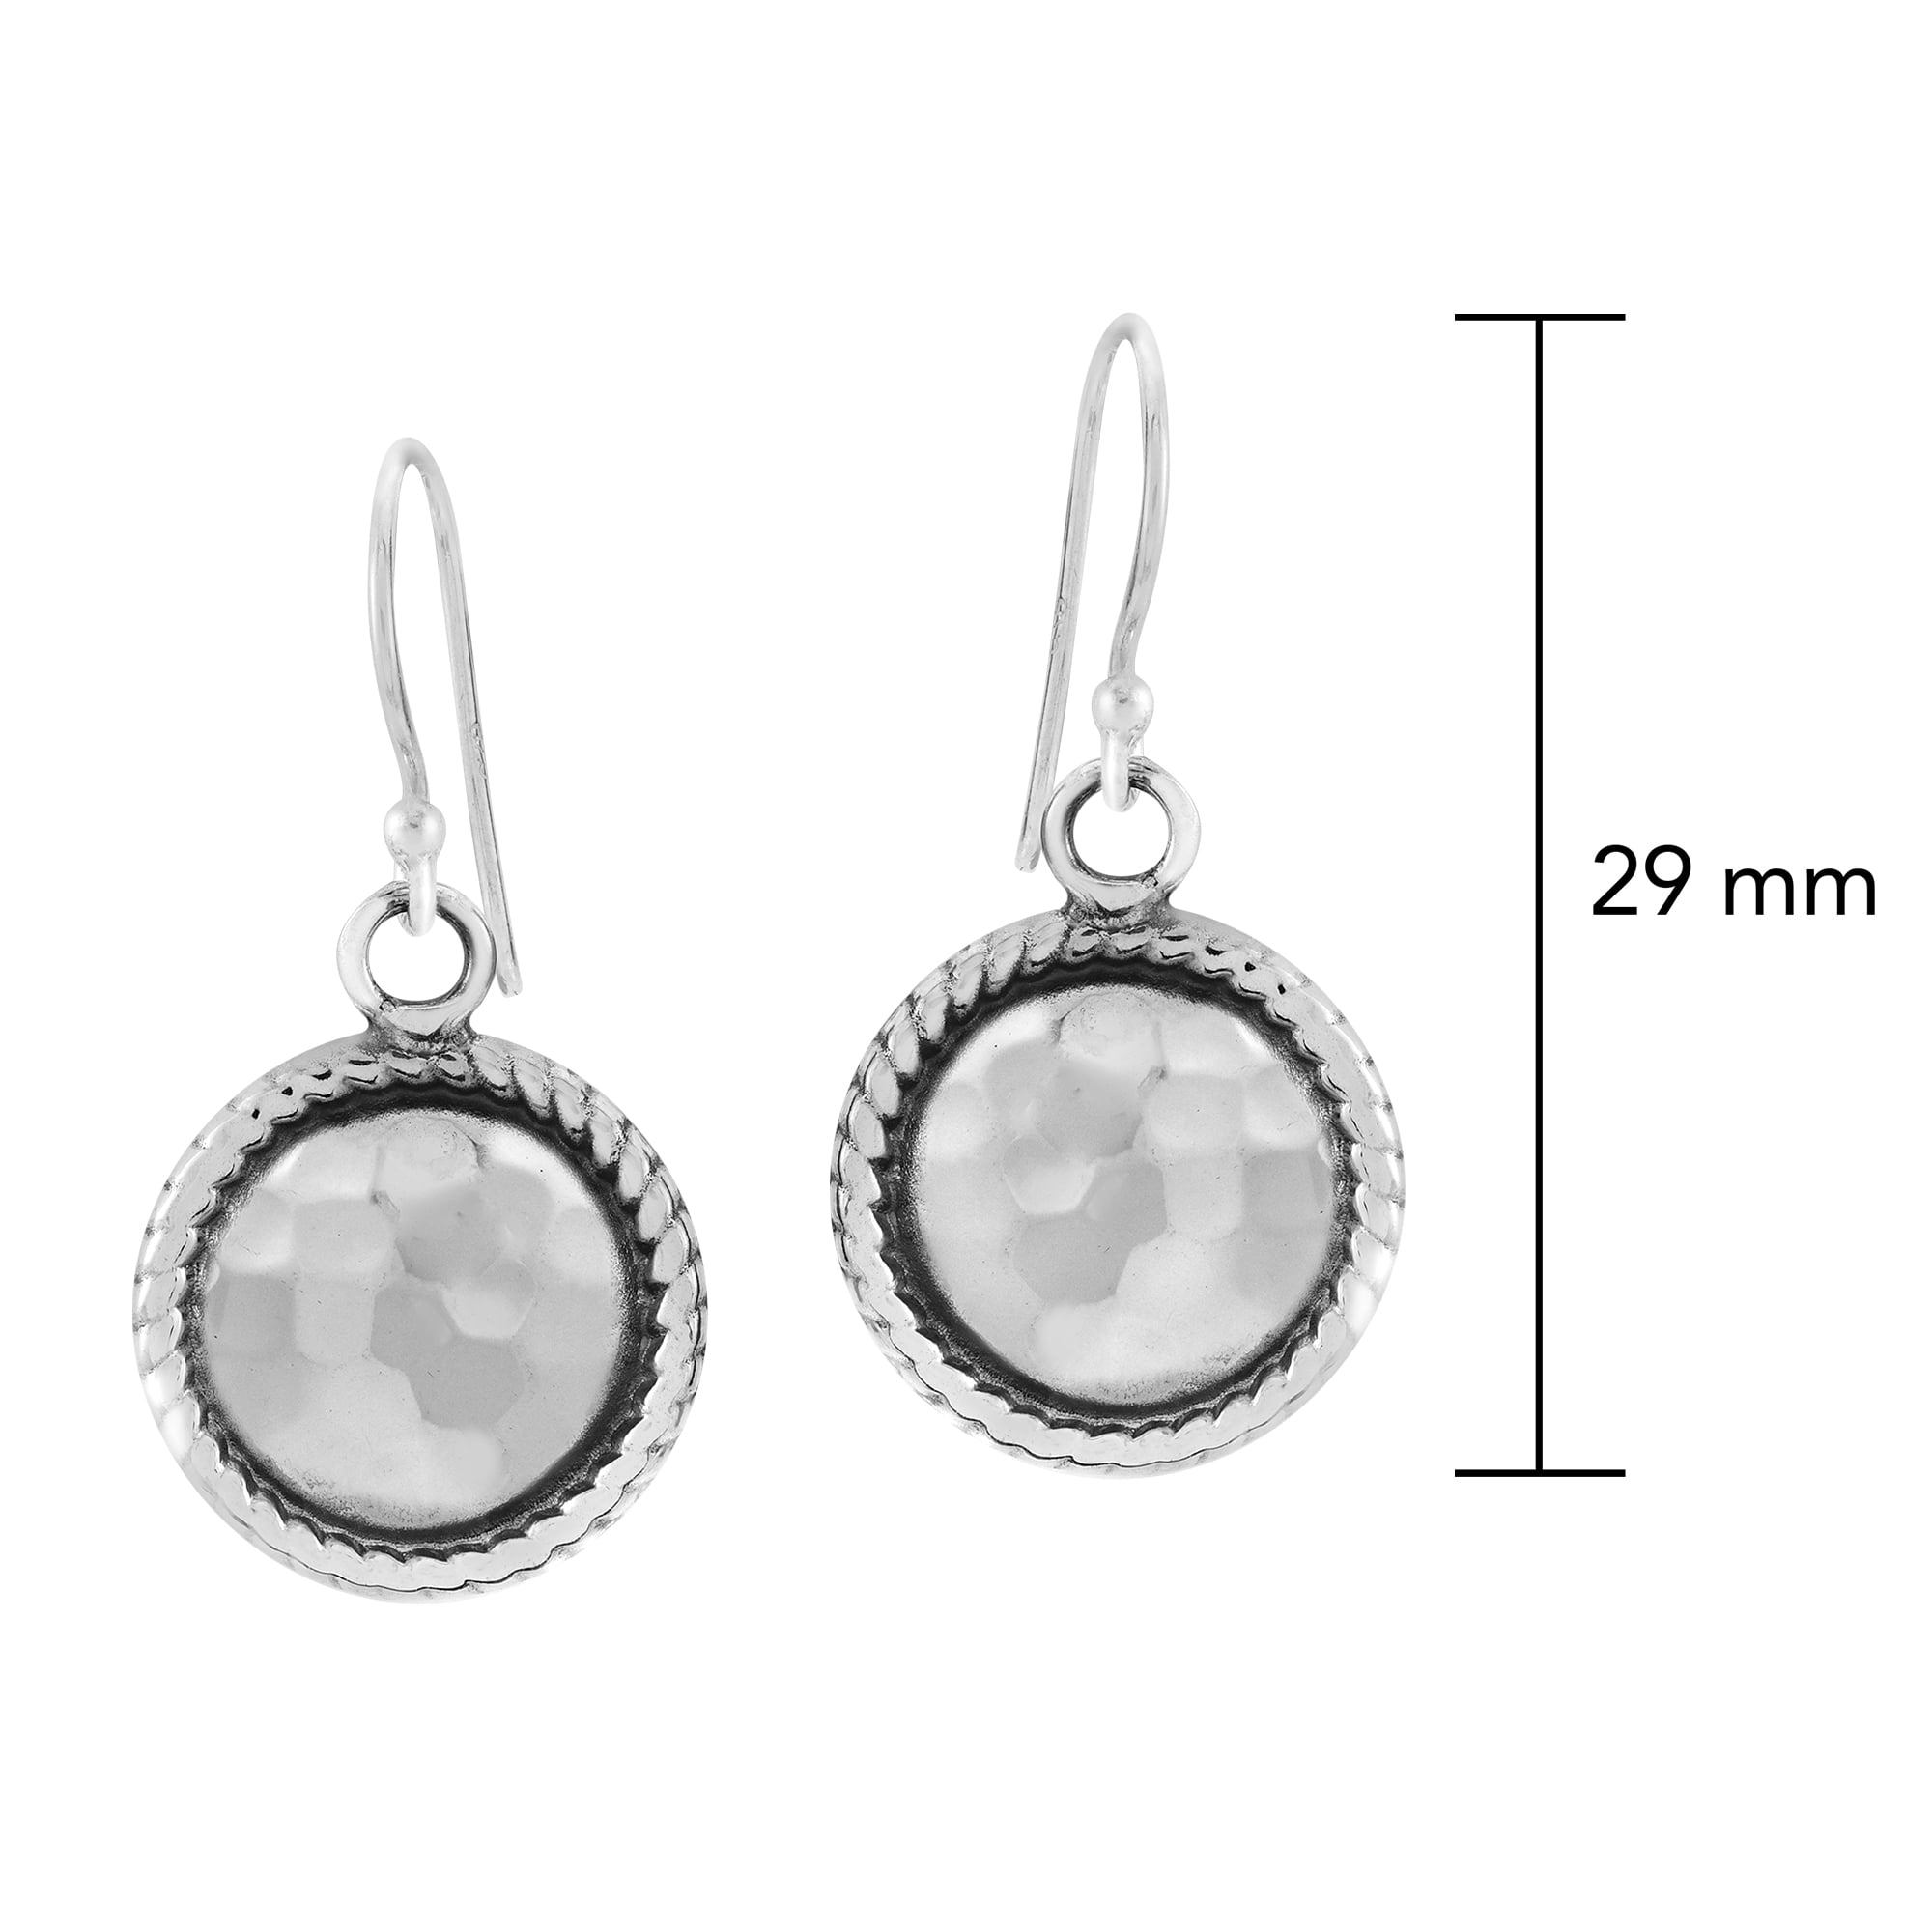 Sterling Silver 925 Sparkly Hammered Round Disc Ear Stud Earrings 10mm Handmade 